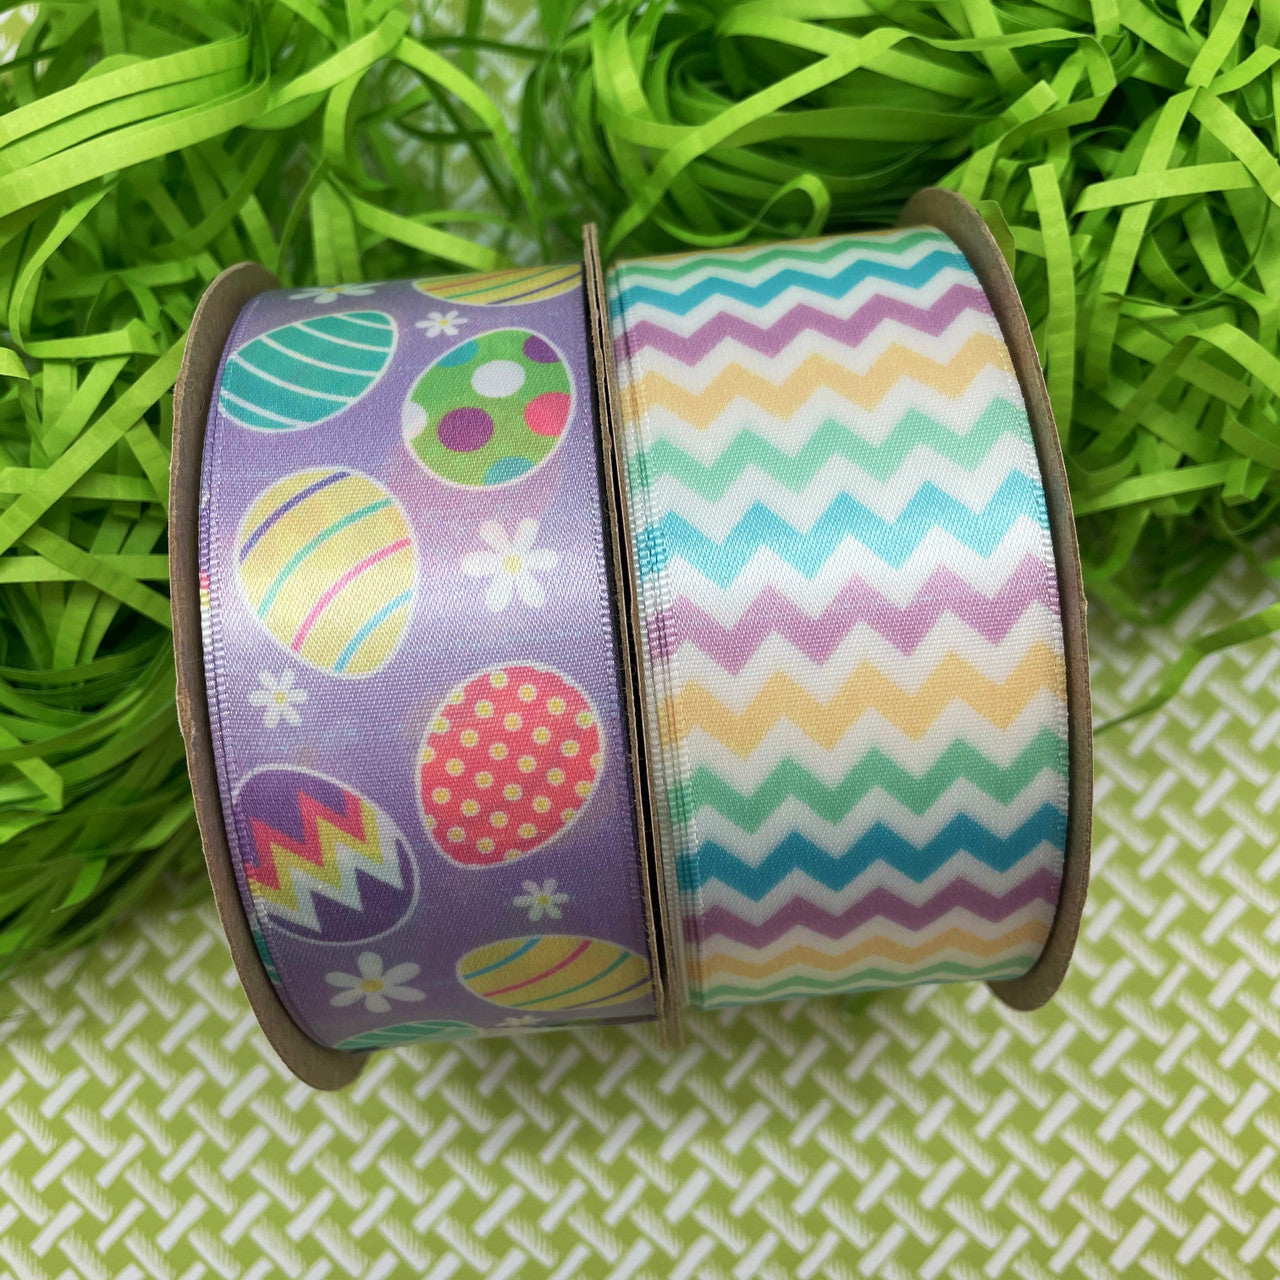 Pair our Easter eggs with our Easter pastel chevron for fun Easter decor!